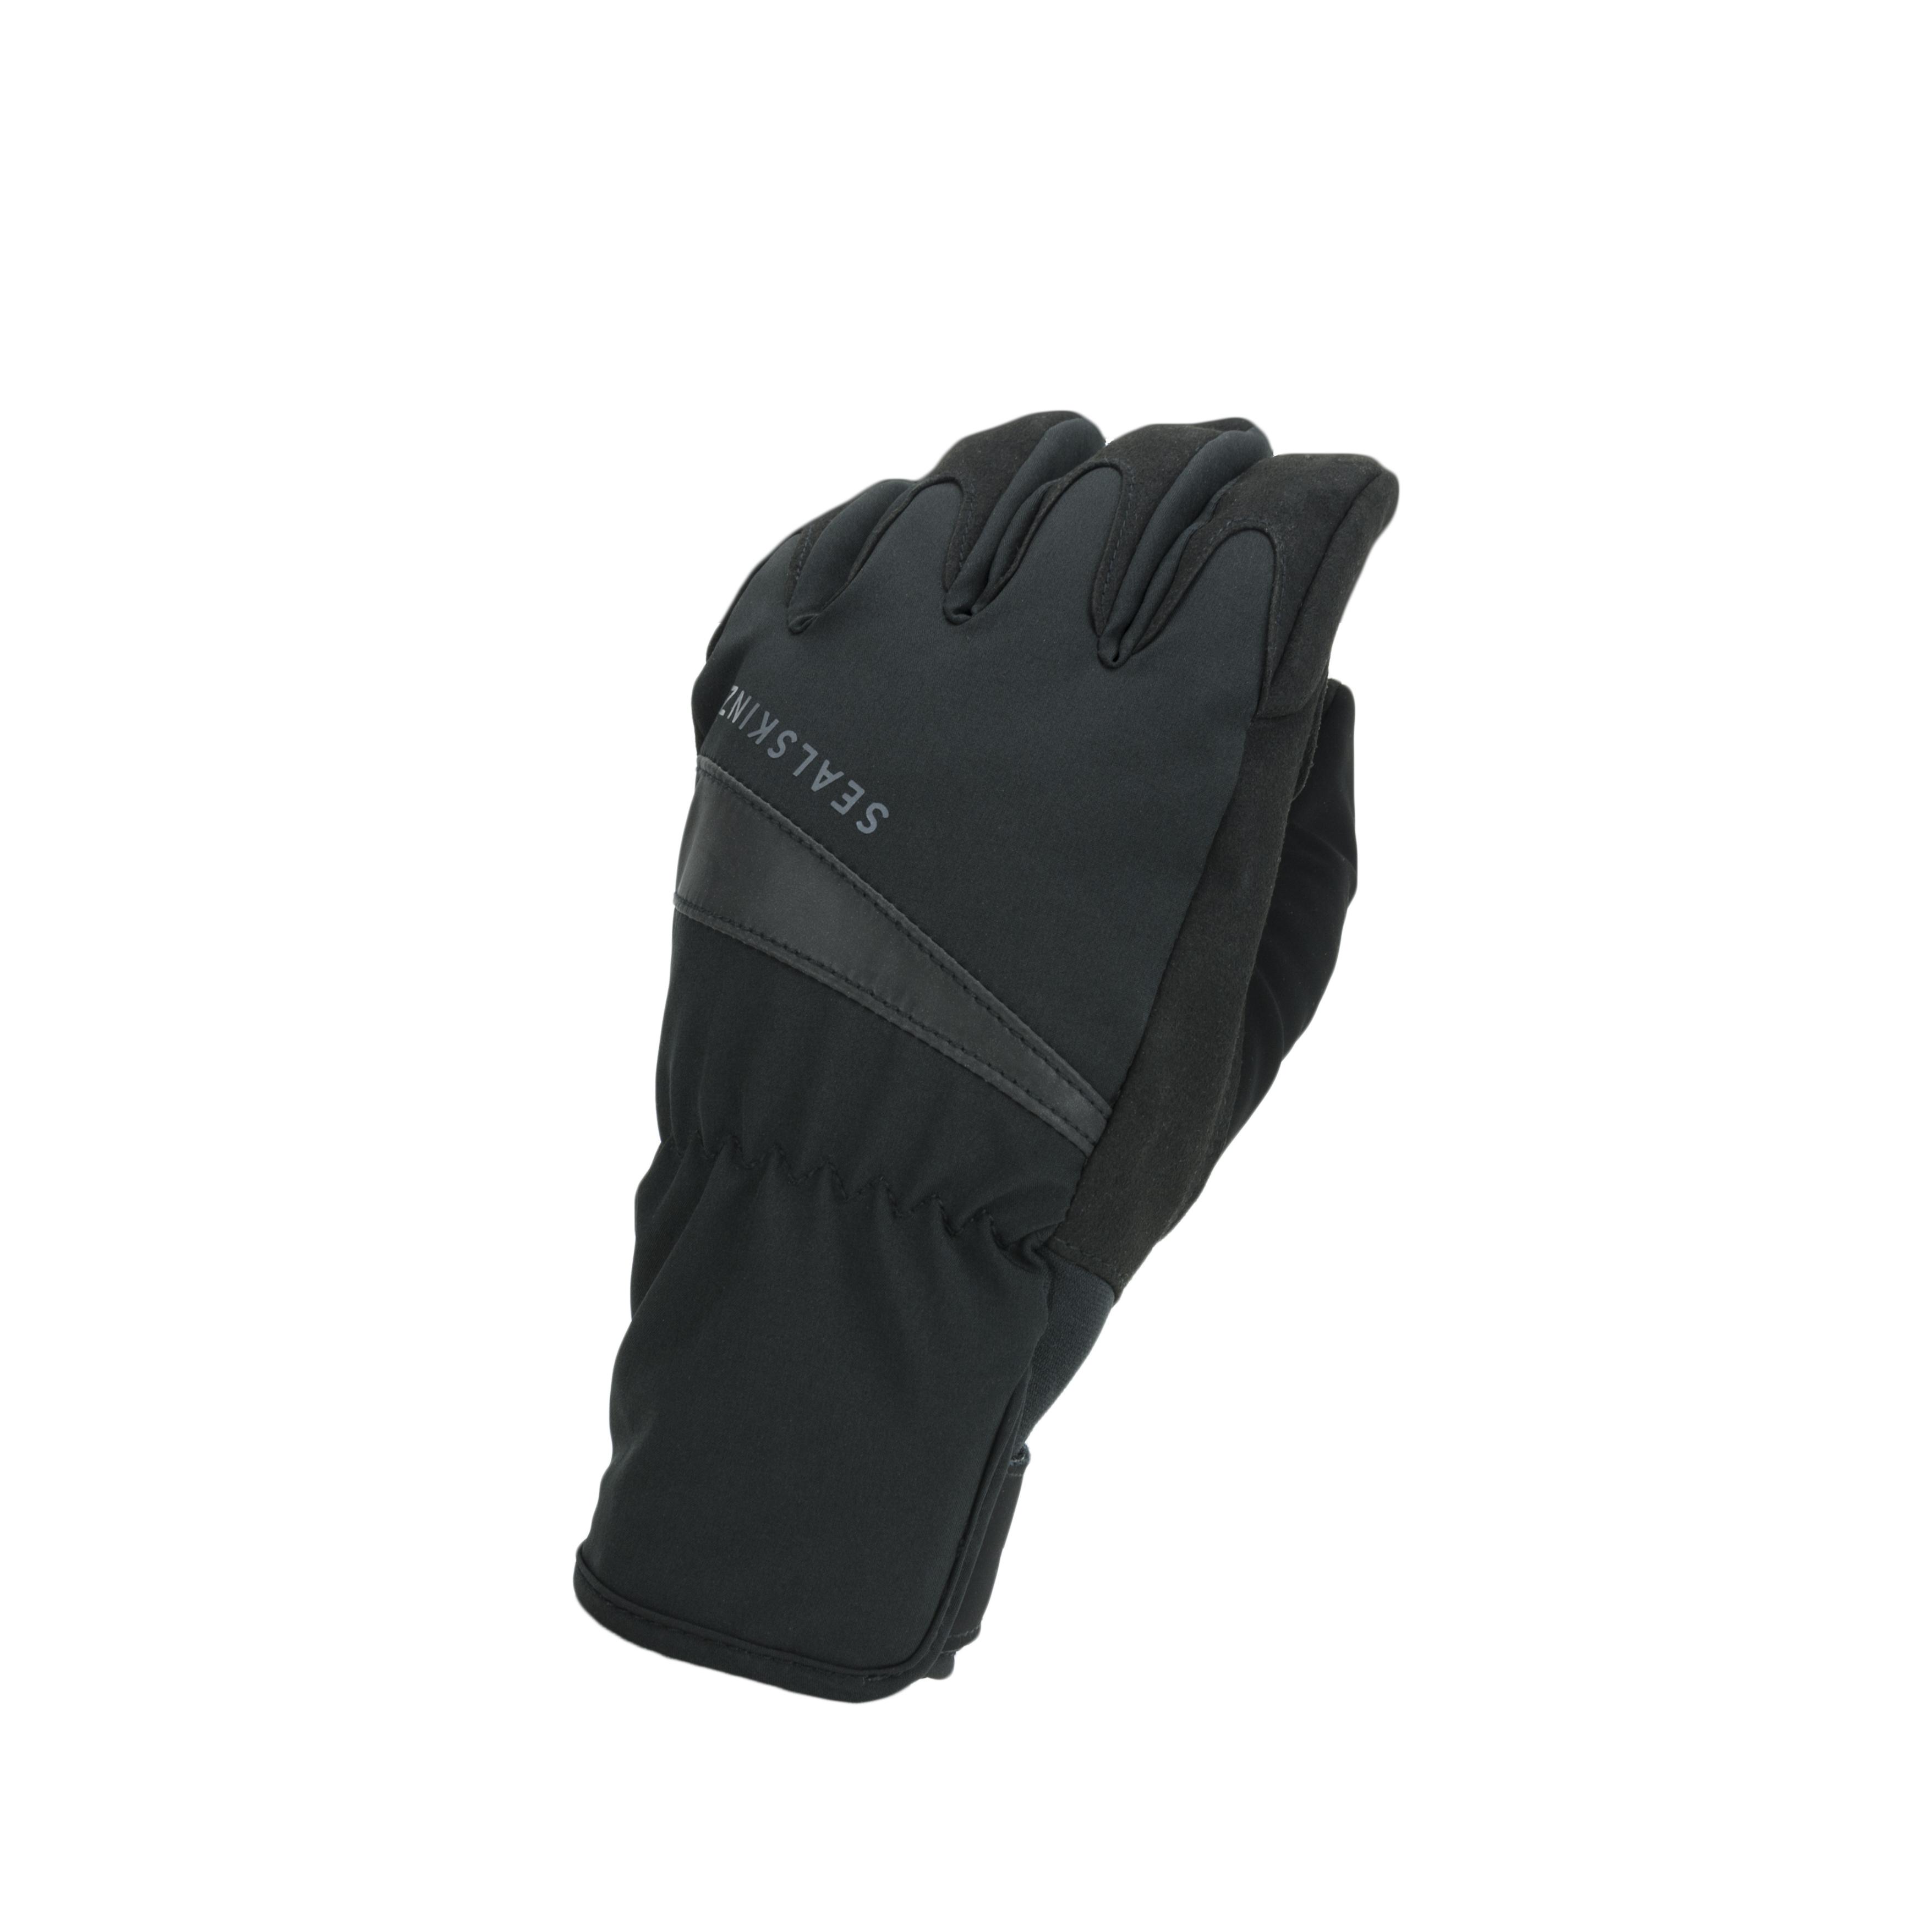 Sealskinz Womens All Weather Cycle Glove, Black - M